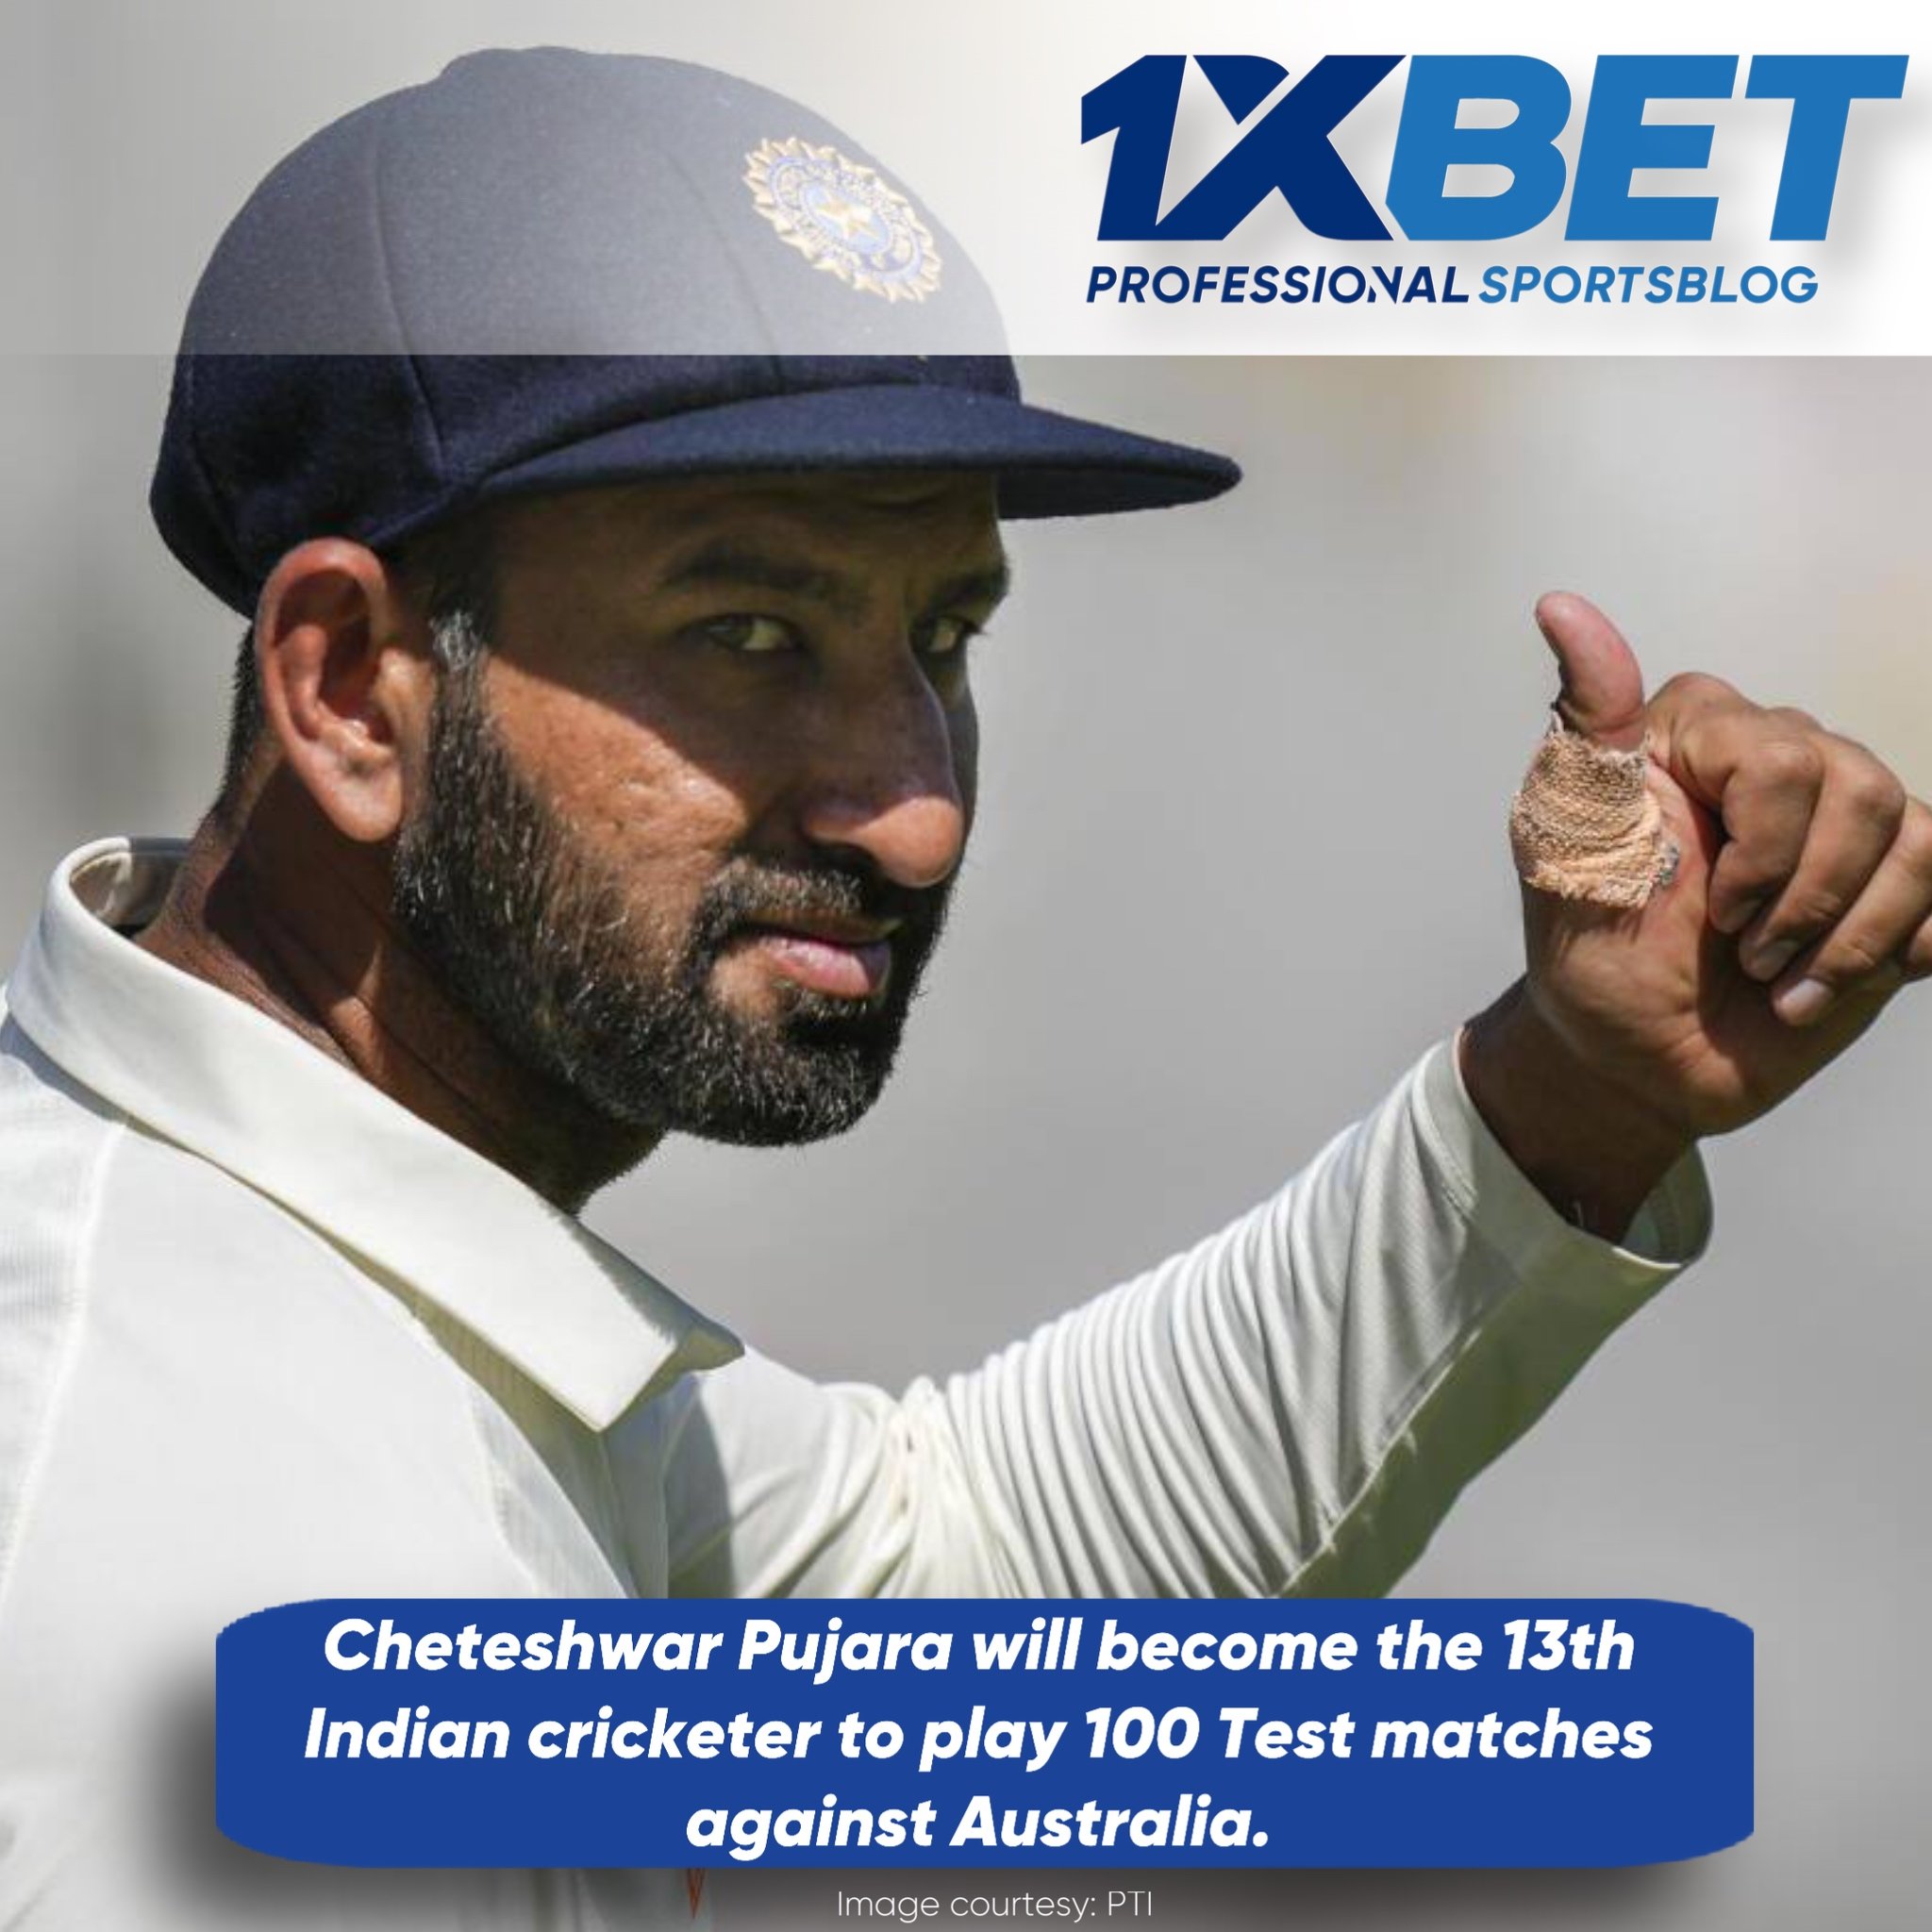 Cheteshwar Pujara will become the 13th Indian cricketer to play 100 Test matches against Australia